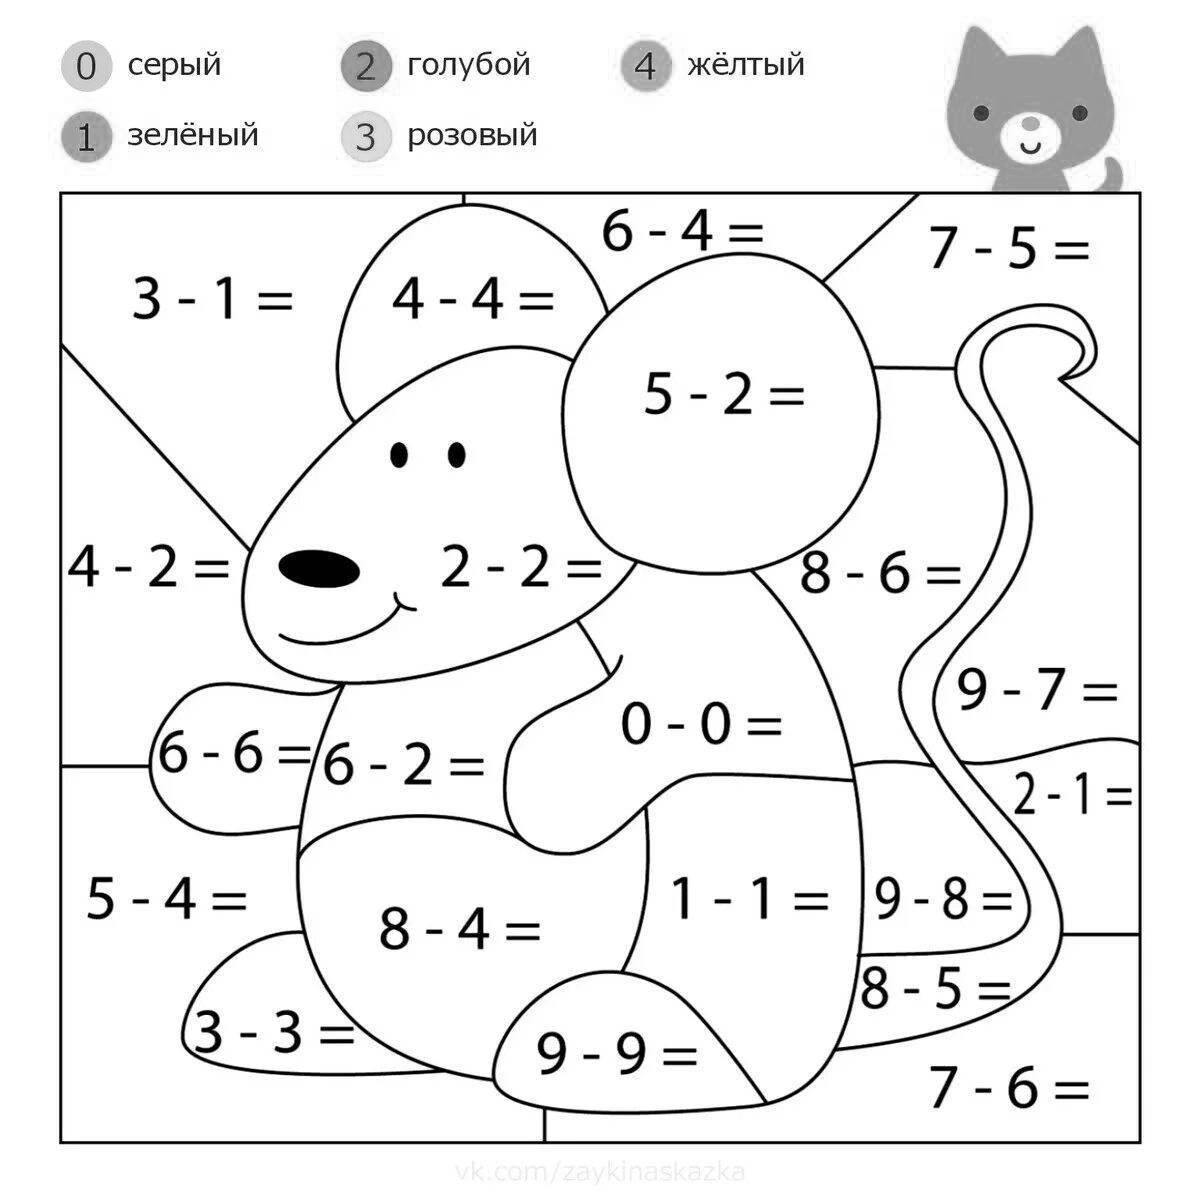 By numbers for children aged 7 with arithmetic examples #1